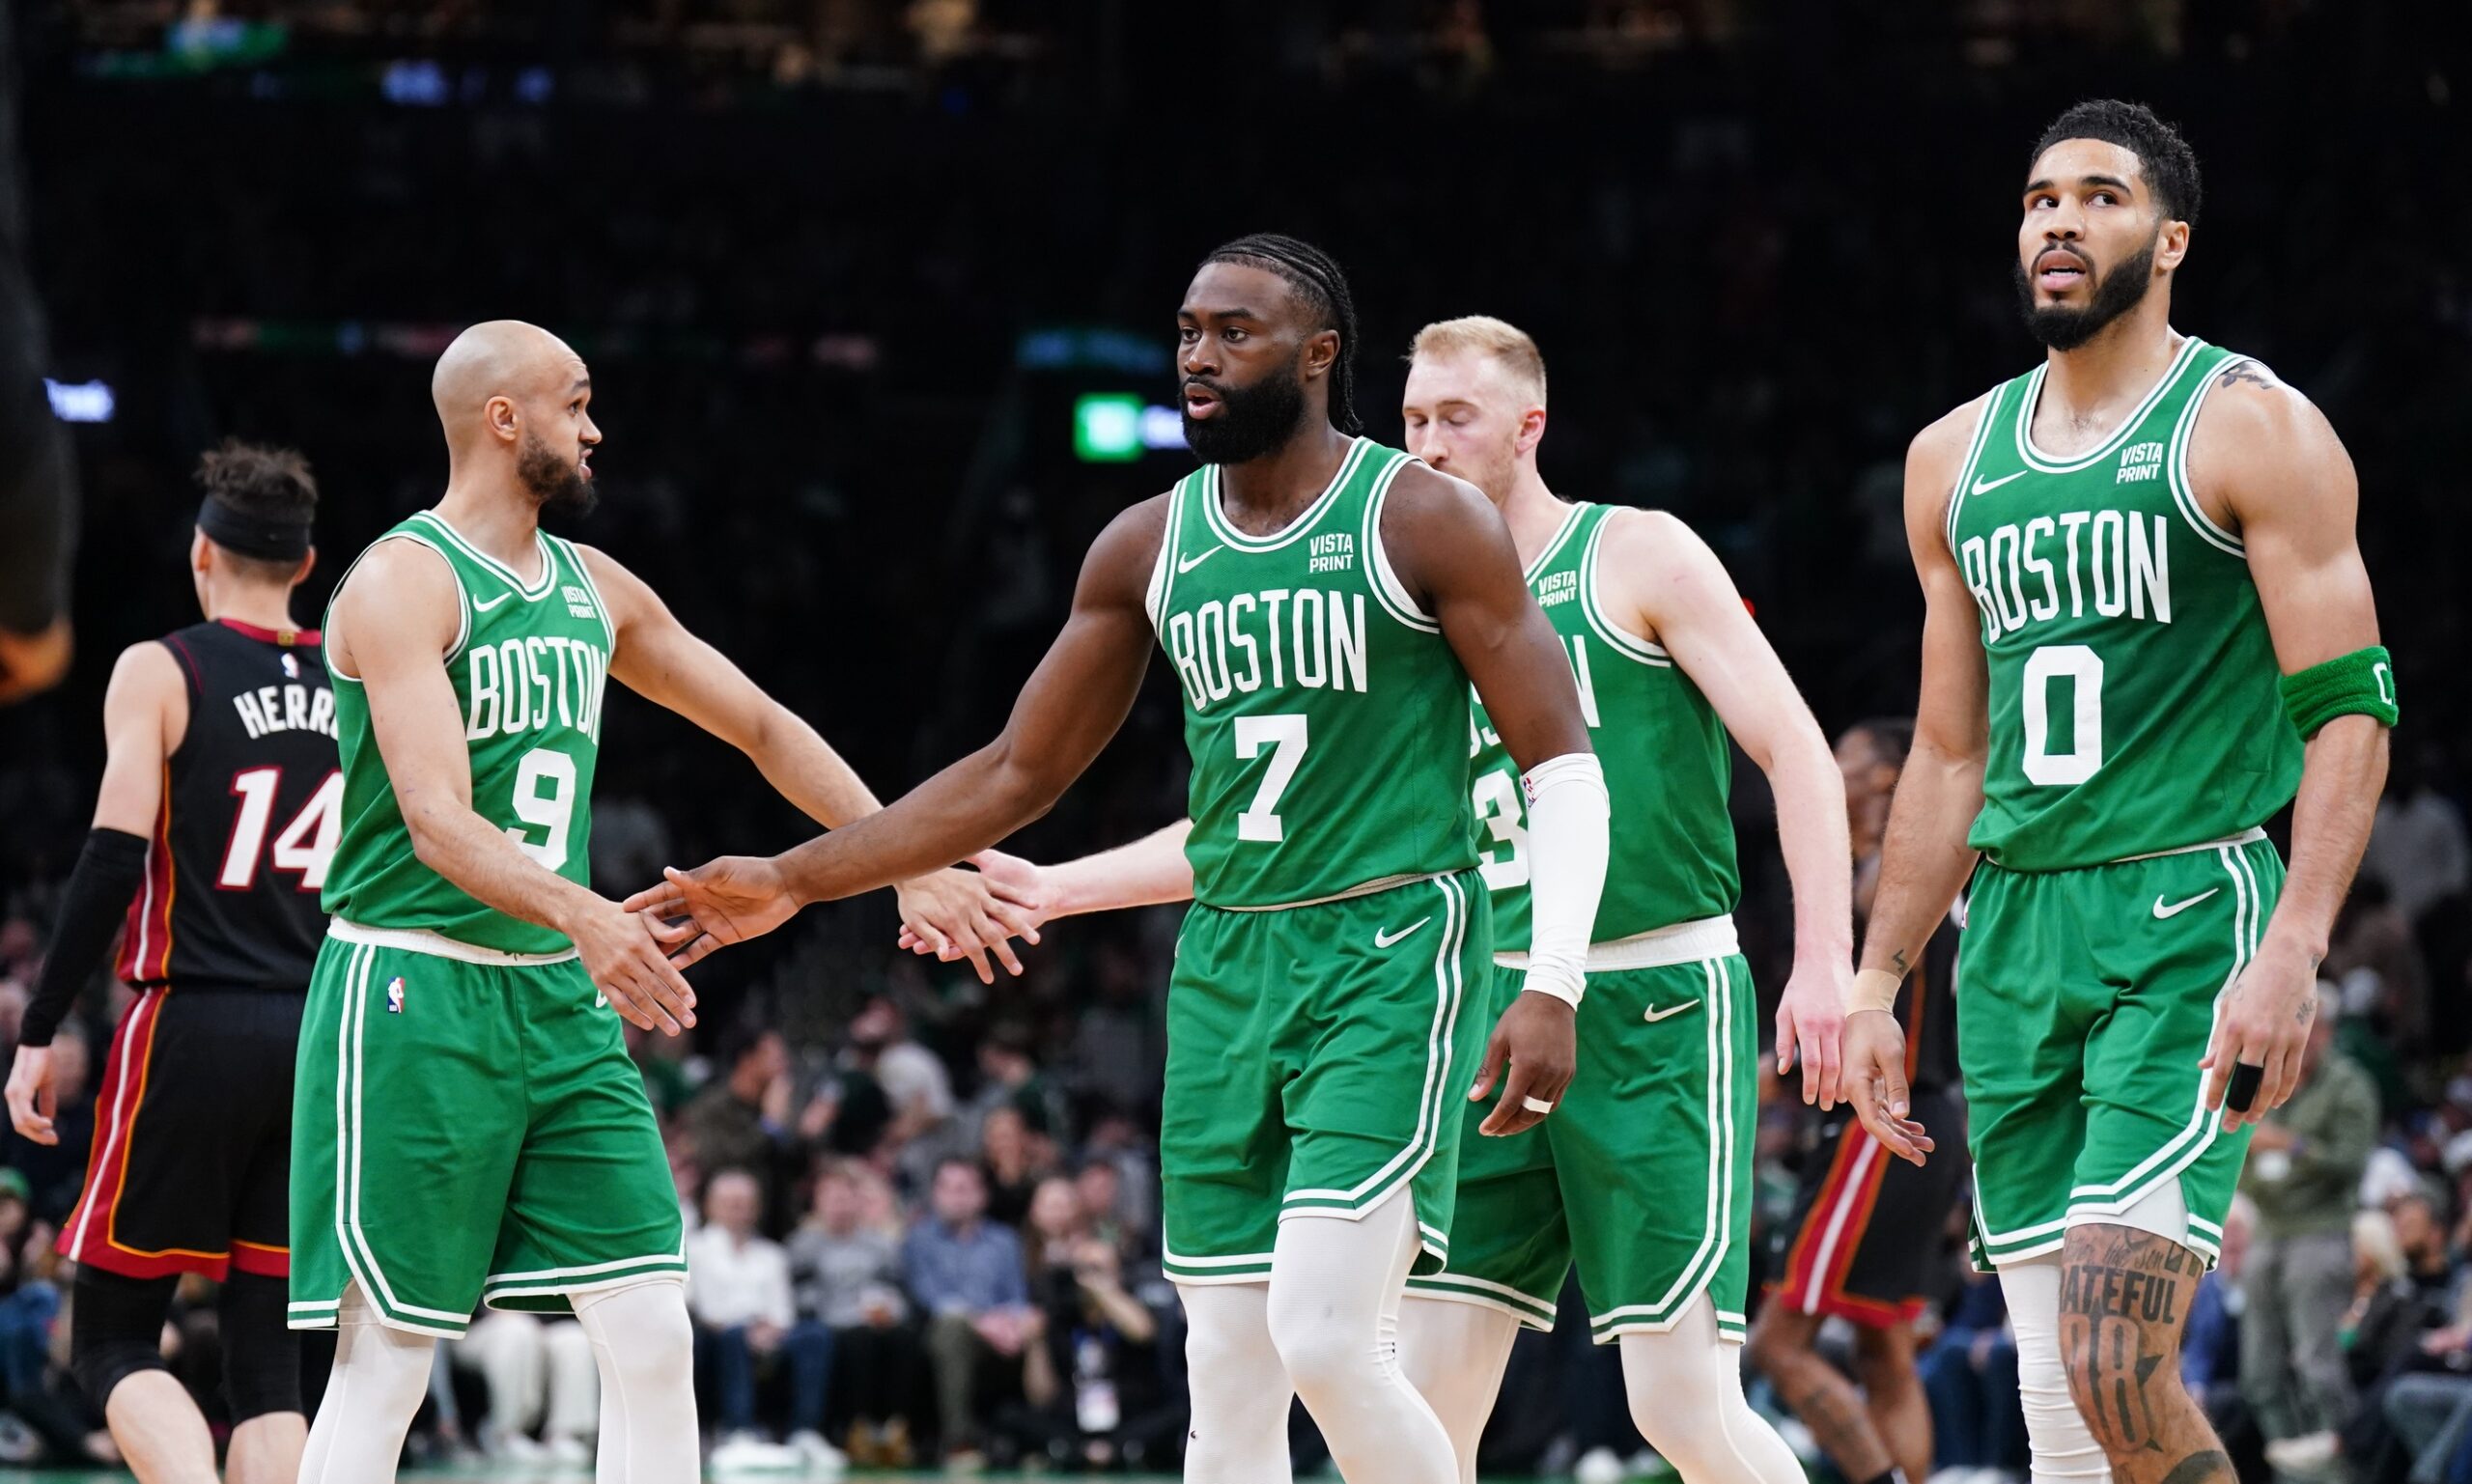 Jayson Tatum, Jaylen Brown and Derrick White are all keys for the Celtics to win the NBA finals.